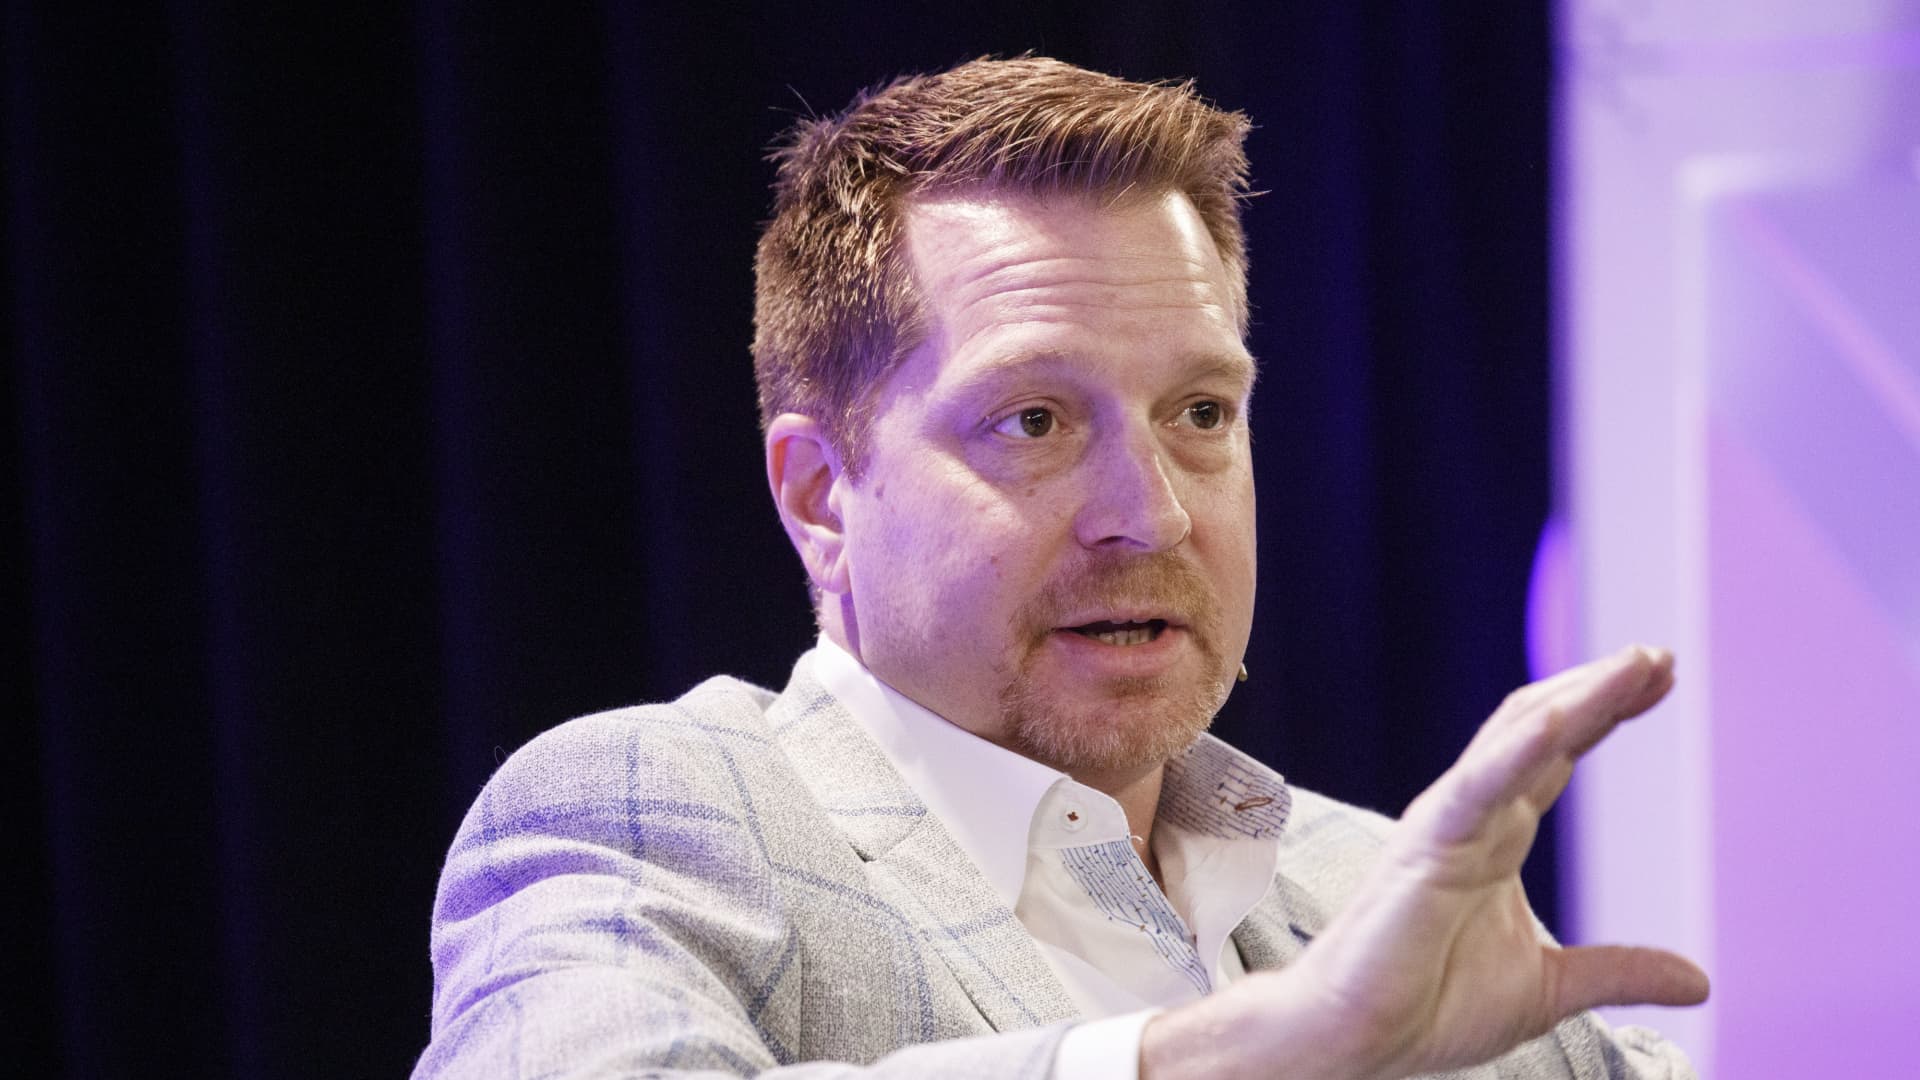 Shares of CrowdStrike fall after 'disappointing' earnings, Morgan Stanley says buy the dip